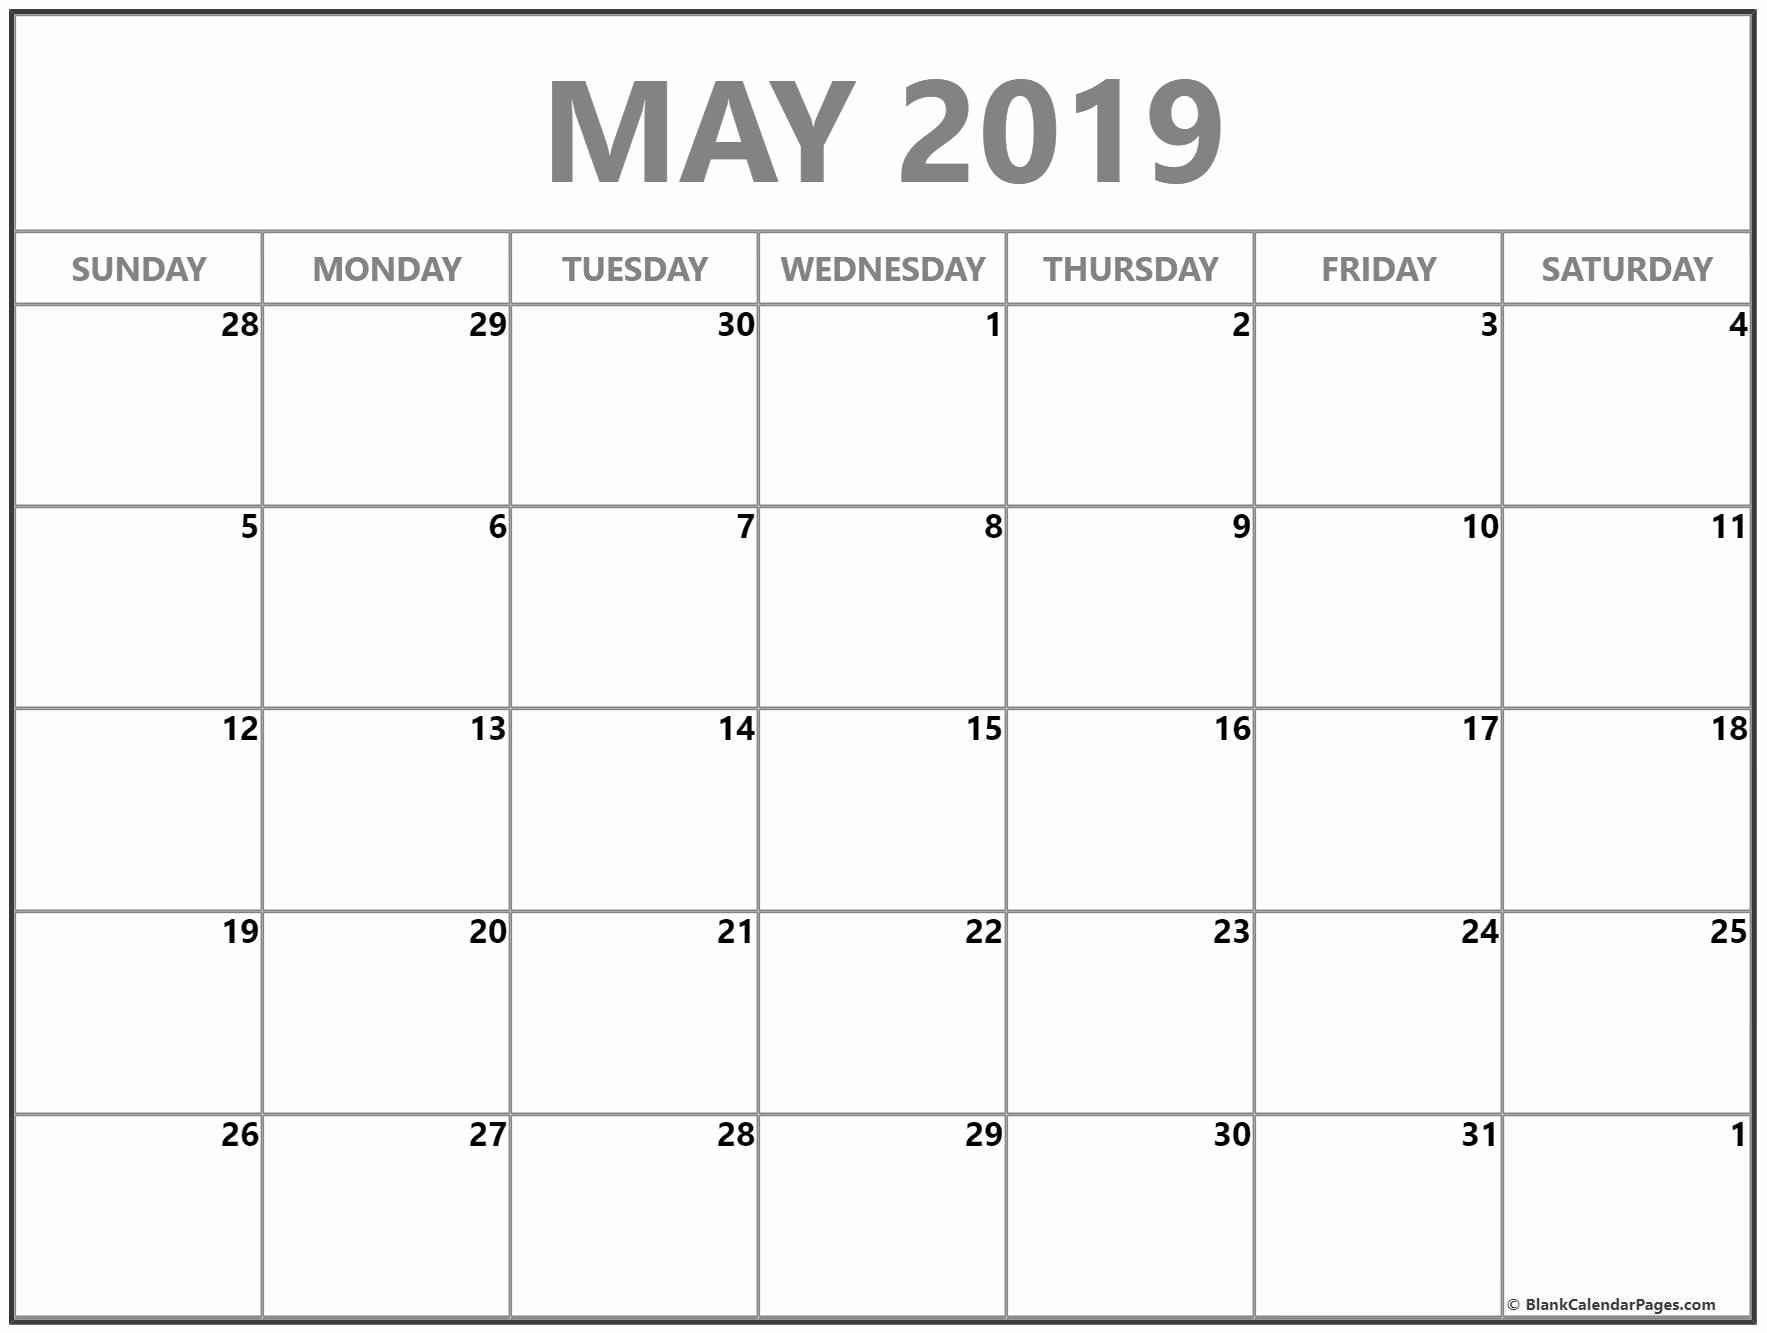 Monthly Blank Calendar May 2019